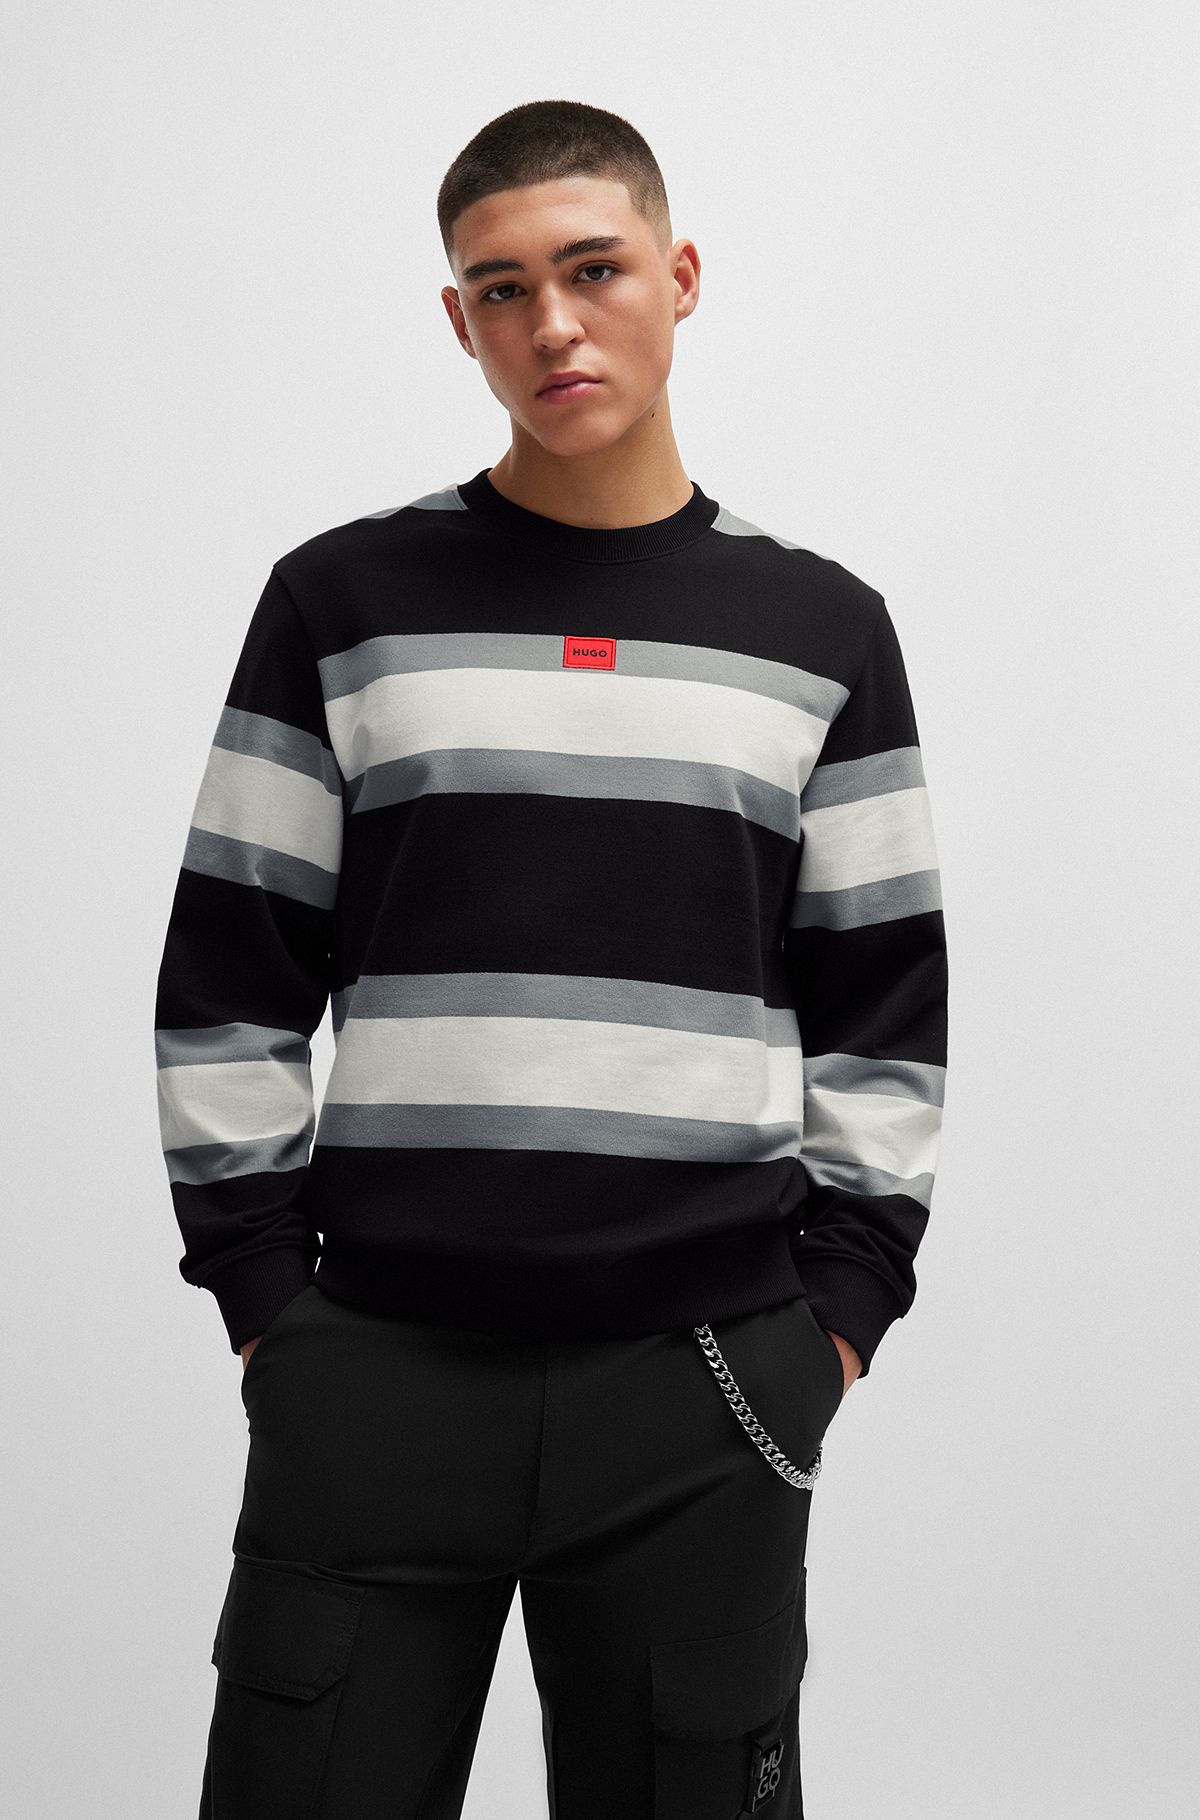 Cotton sweatshirt with block stripes and red logo label, Black